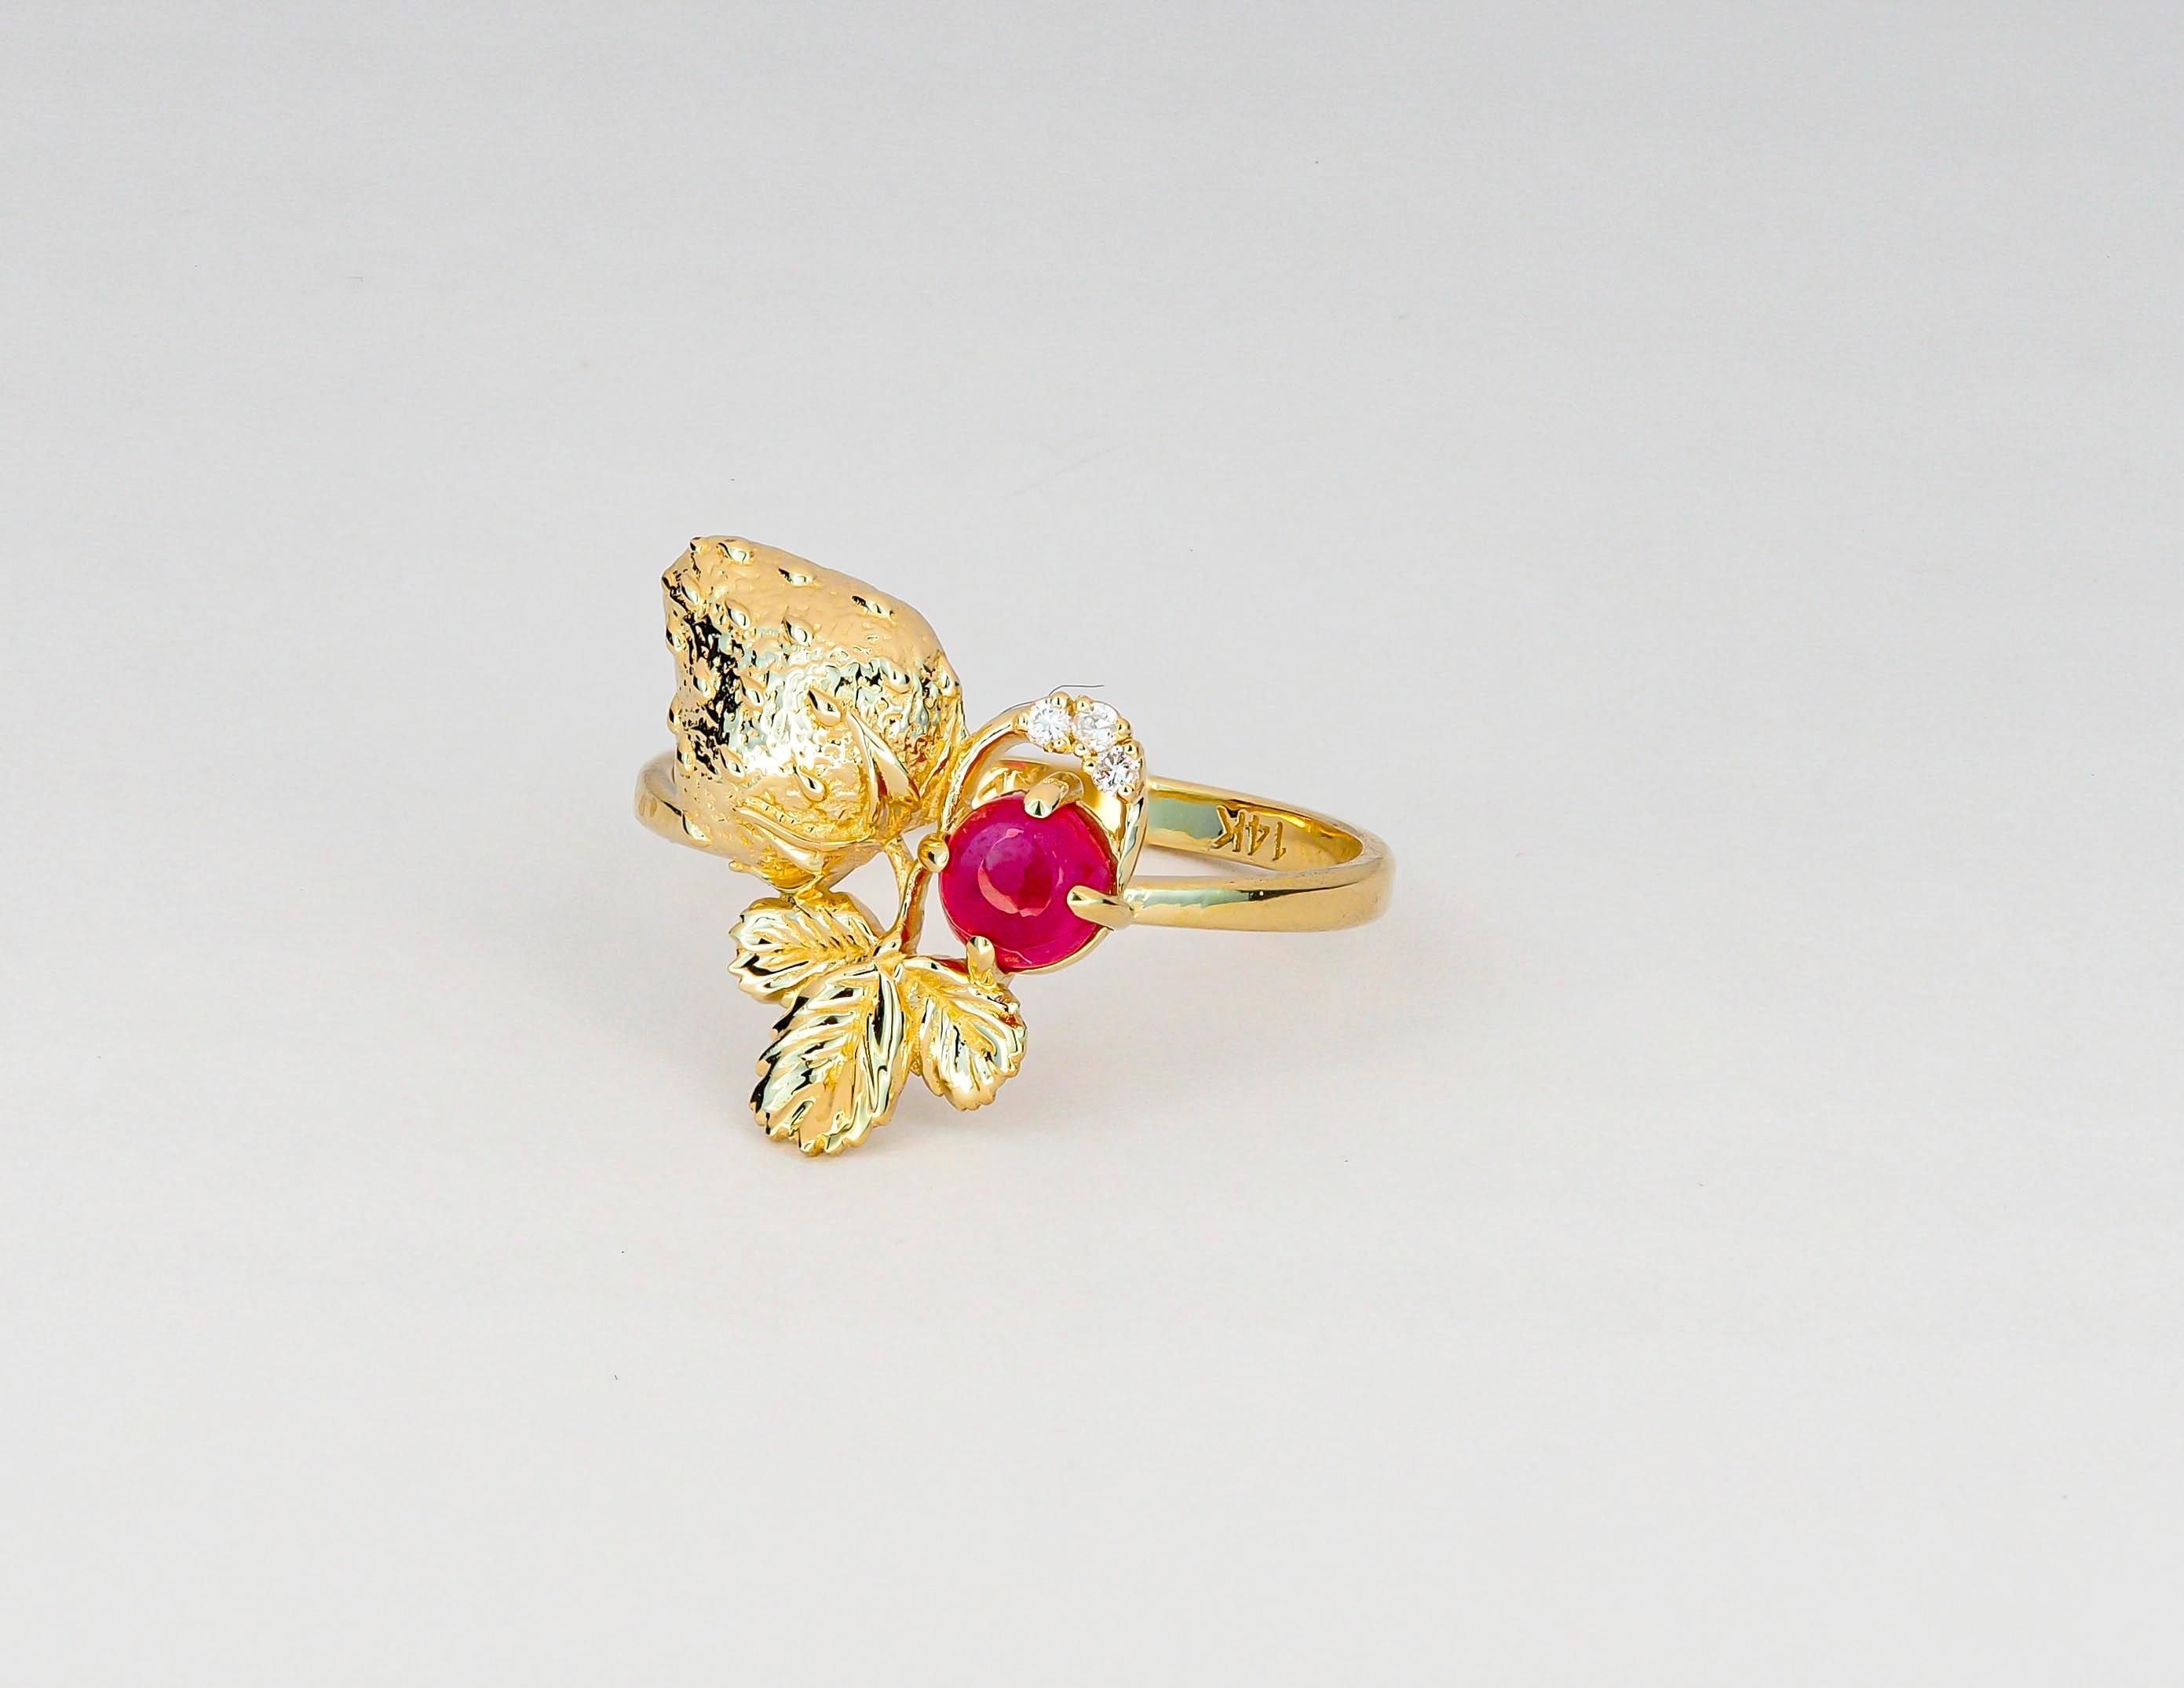 Cabochon Strawberry gold ring with ruby.  For Sale